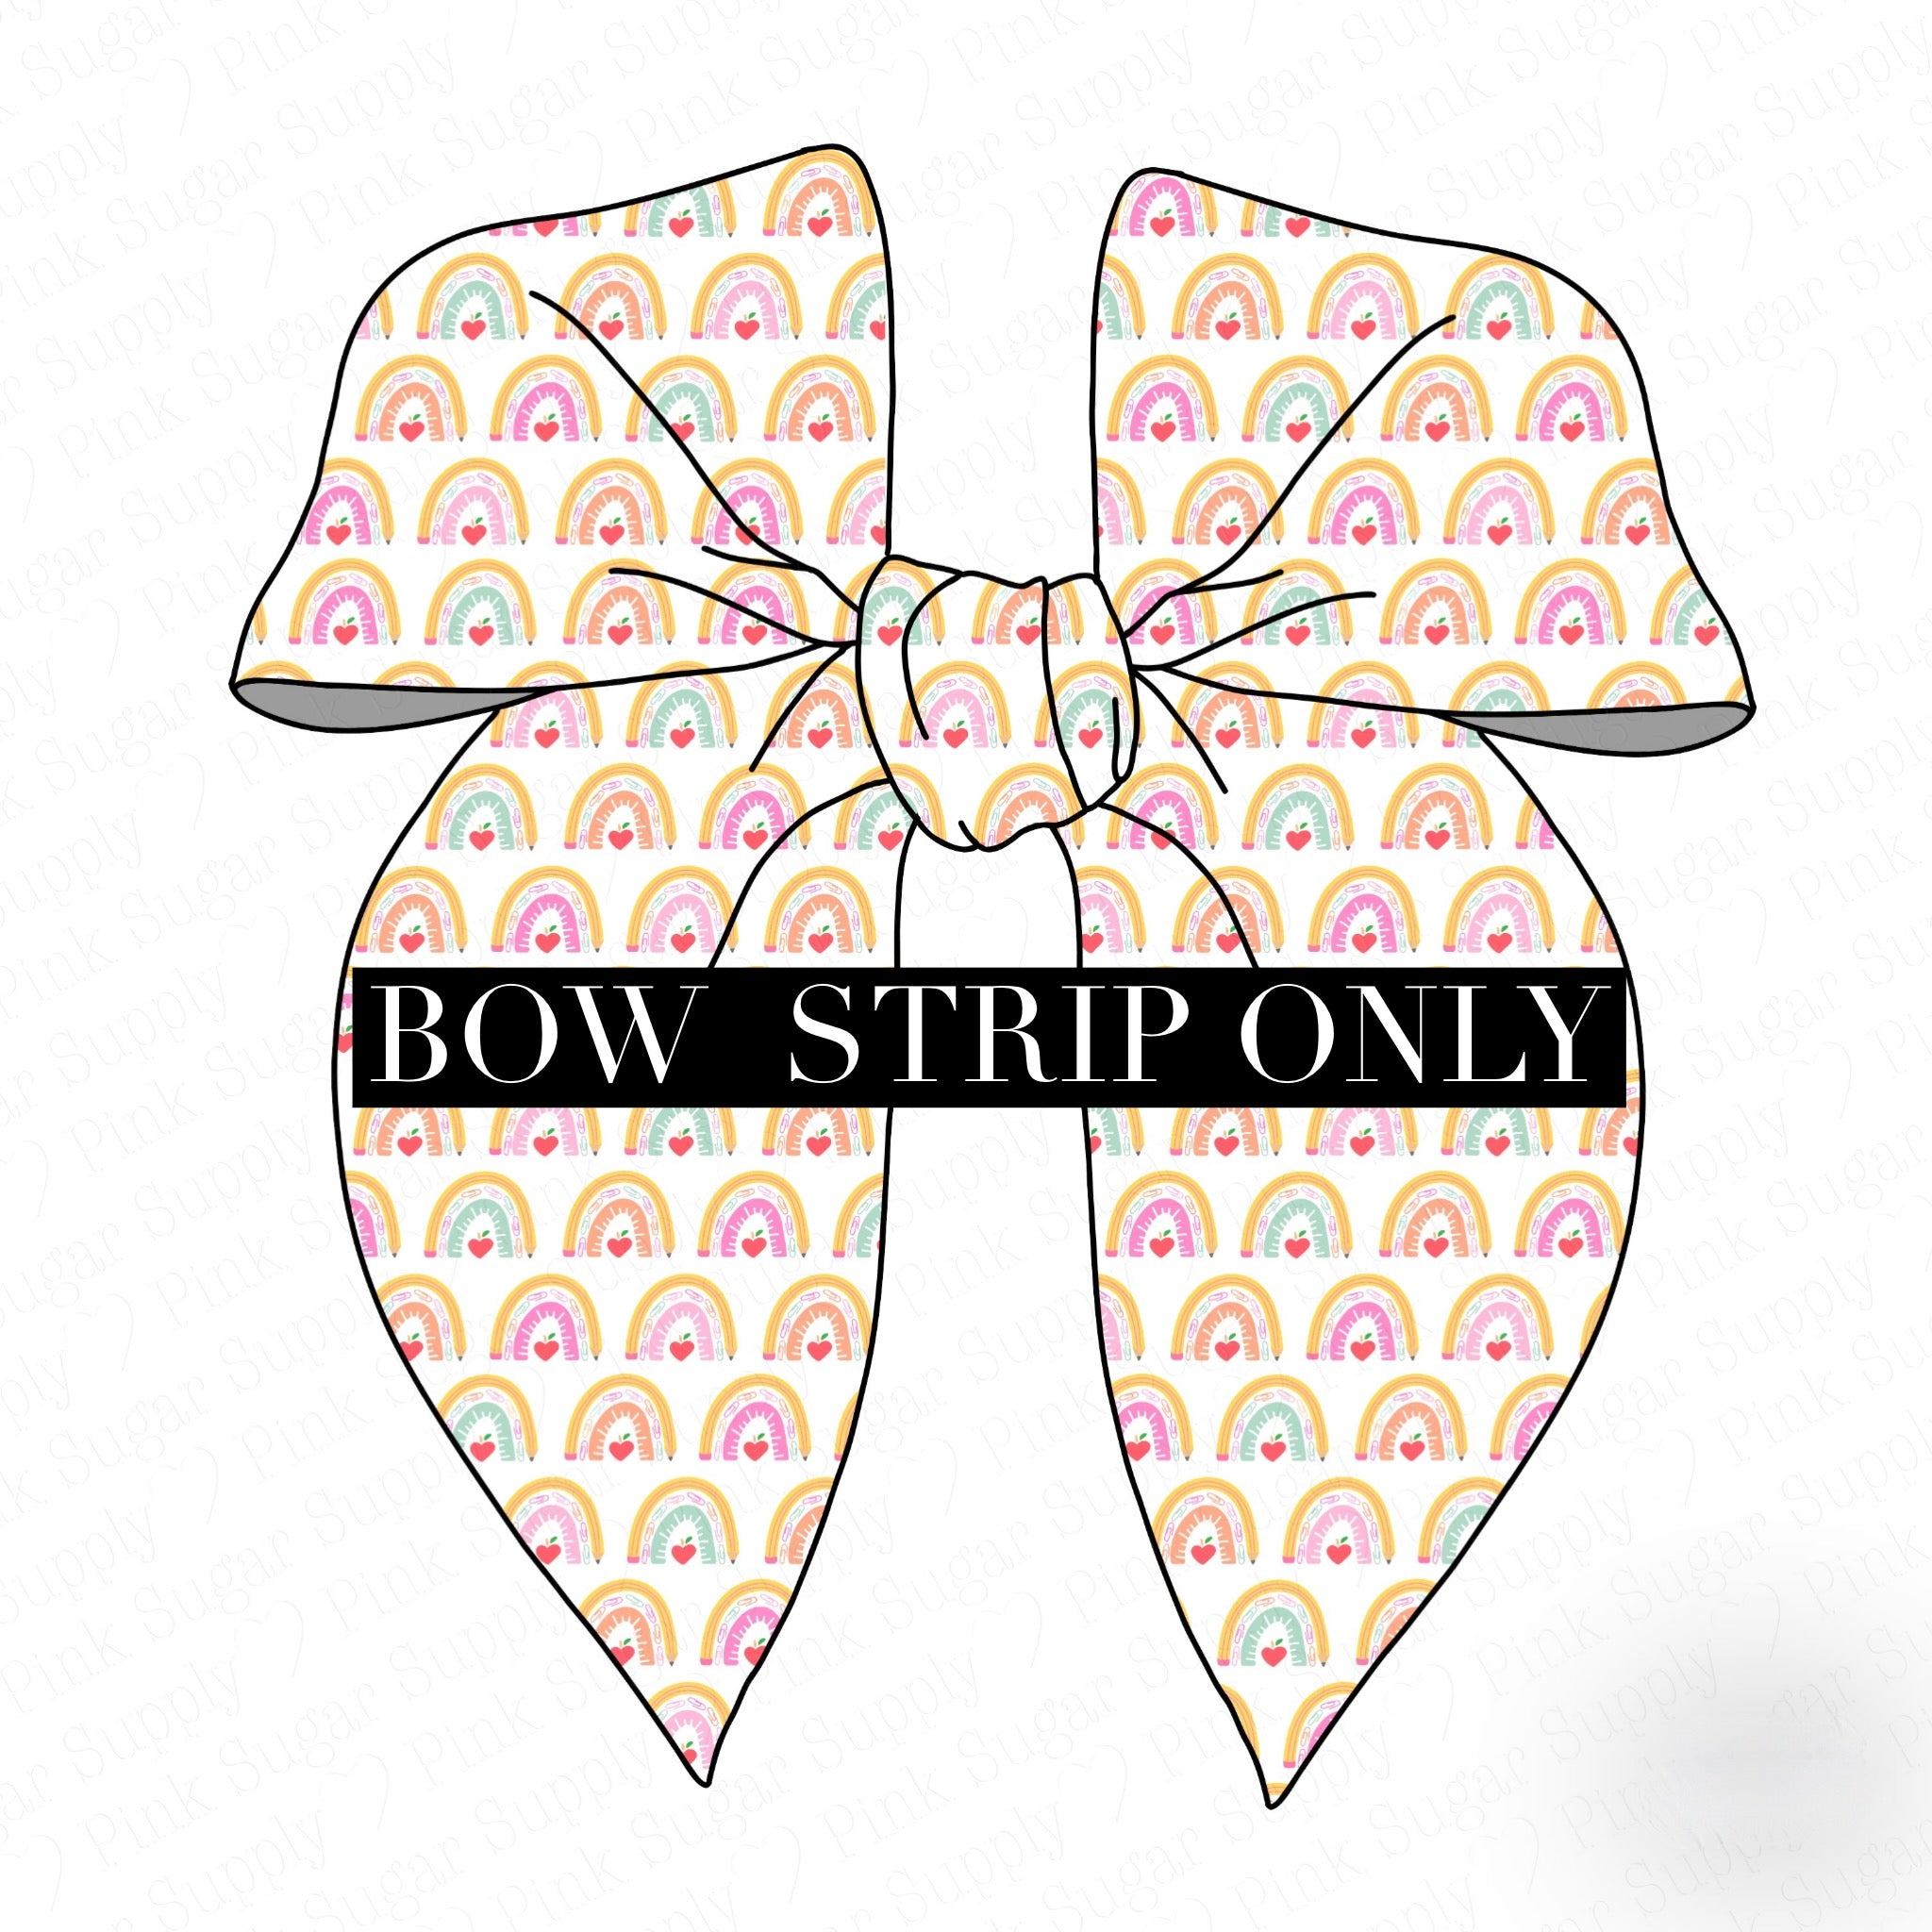 **BOW STRIP ONLY** LARGE SURGED EDGE-Pencil Rainbows BOW STRIP ONLY**SURGED EDGE Bow-Wholesale Price